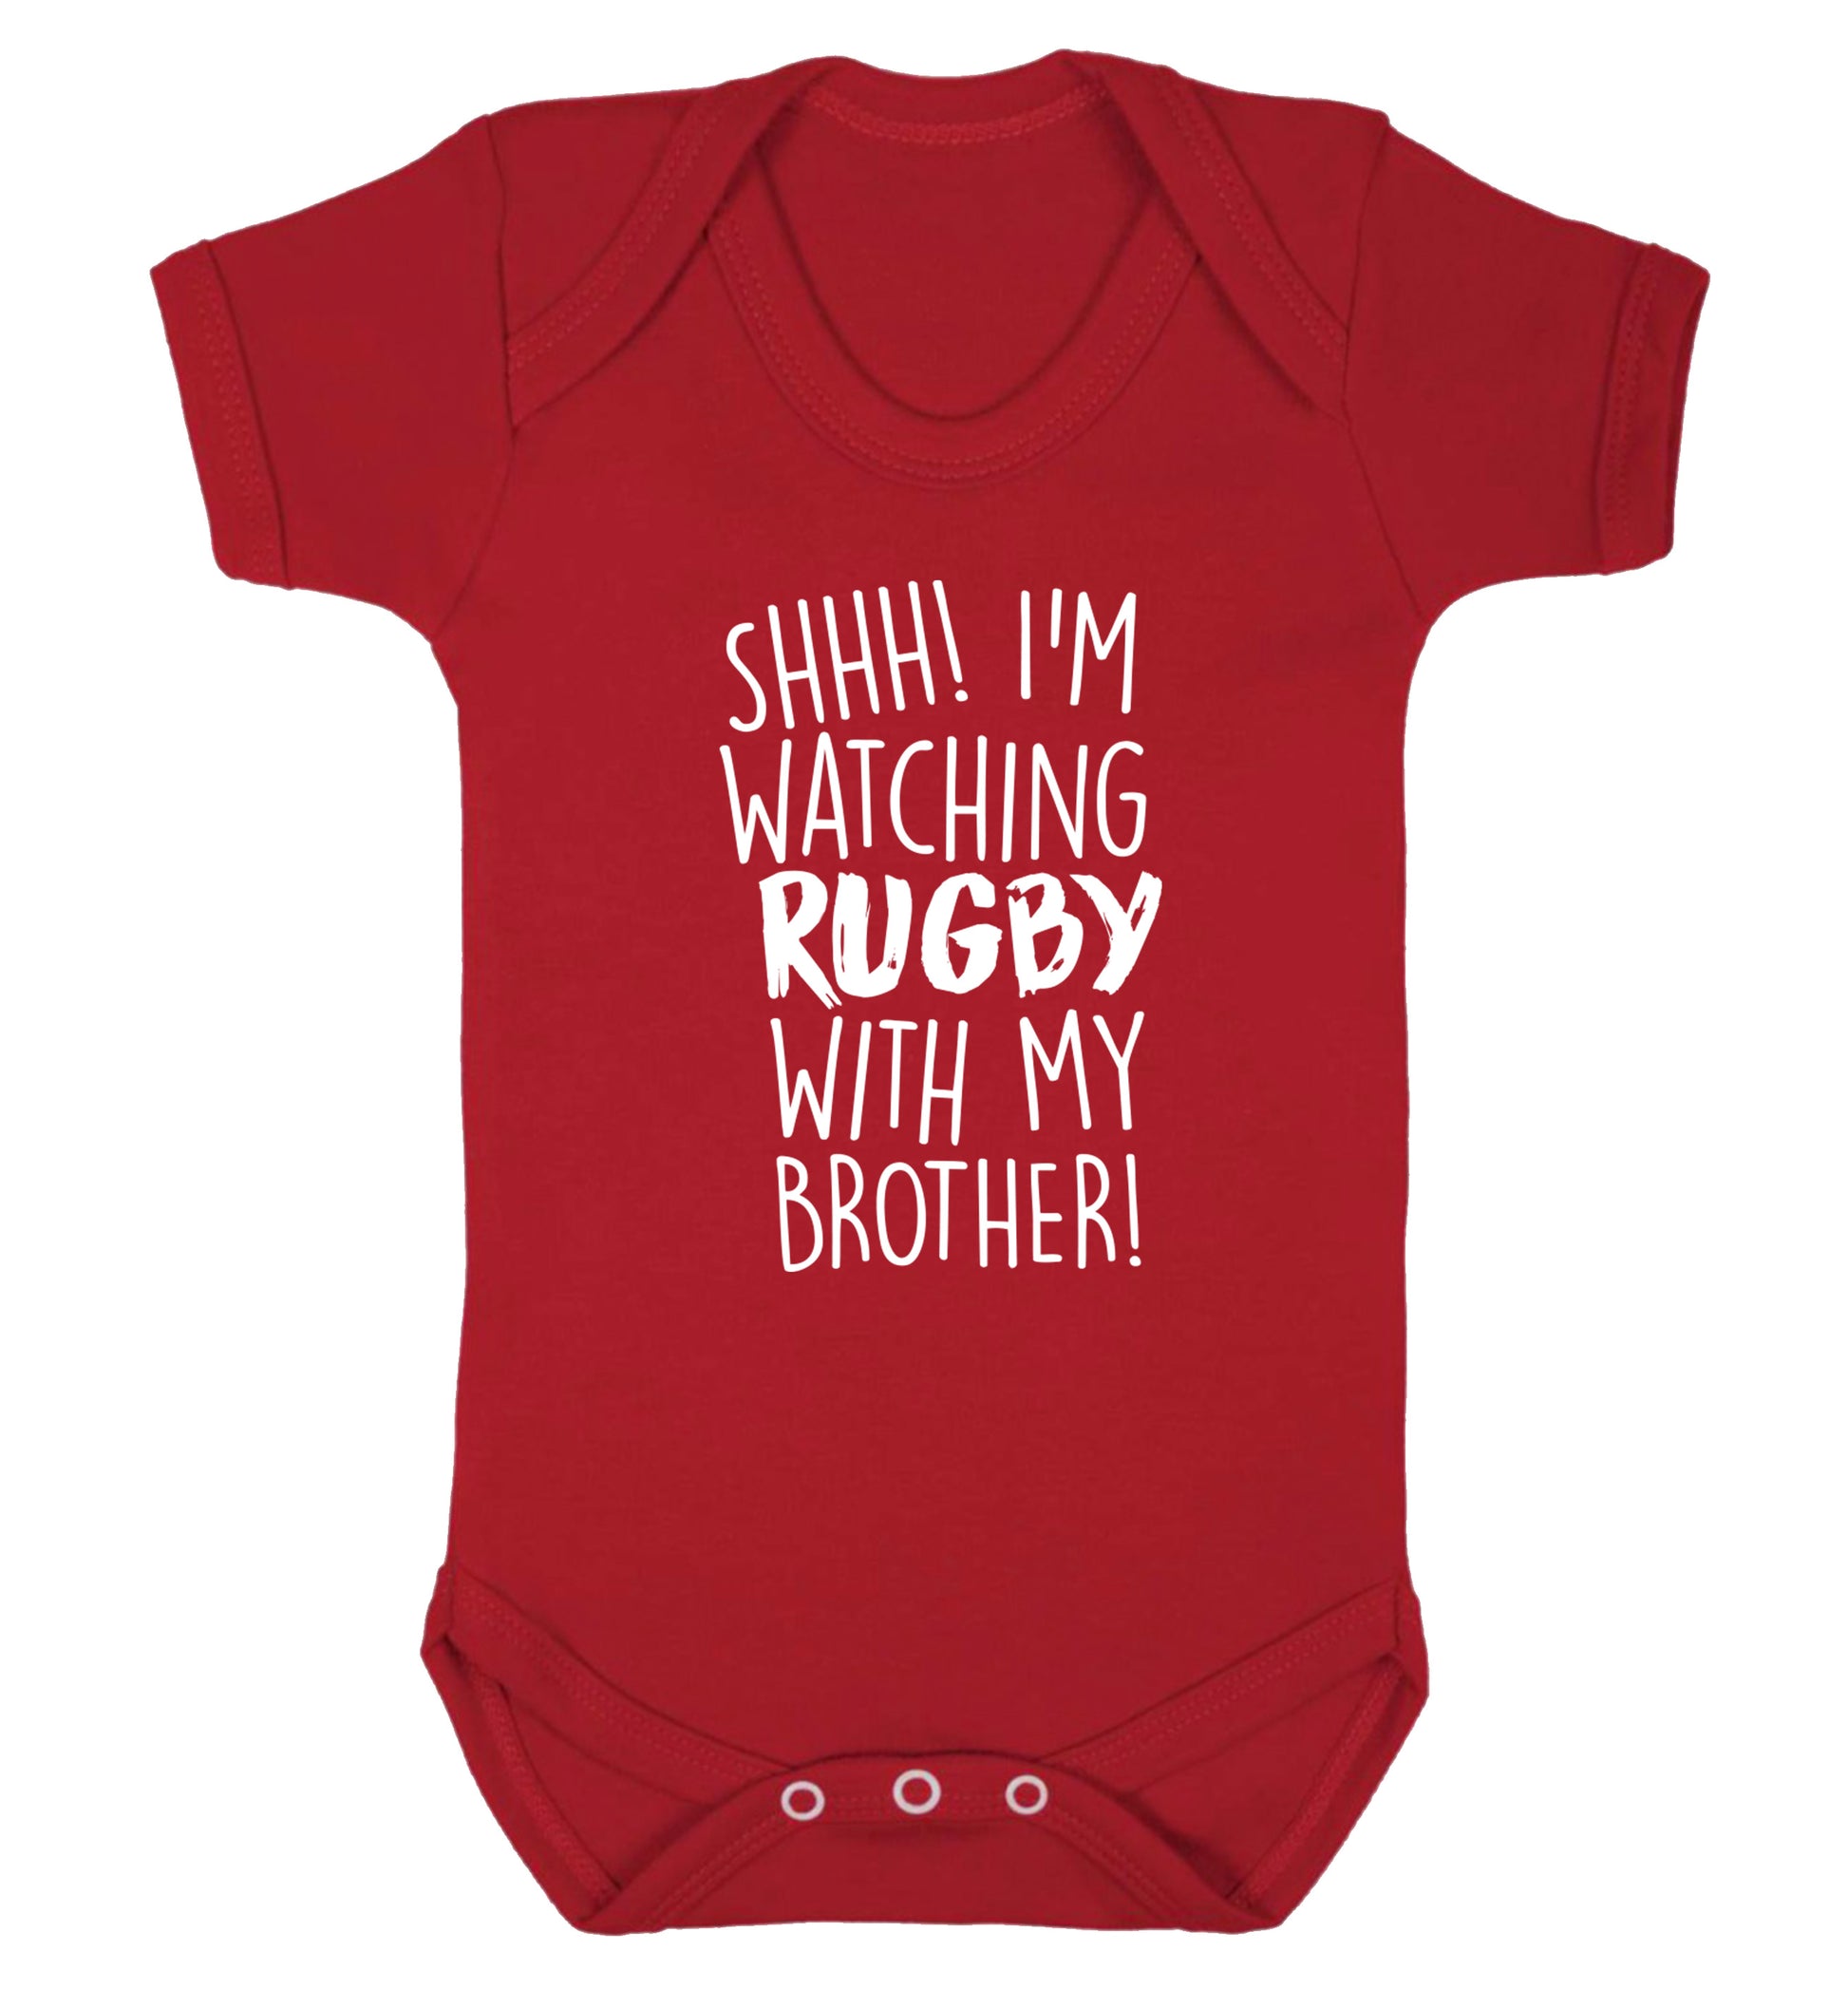 Shh... I'm watching rugby with my brother Baby Vest red 18-24 months